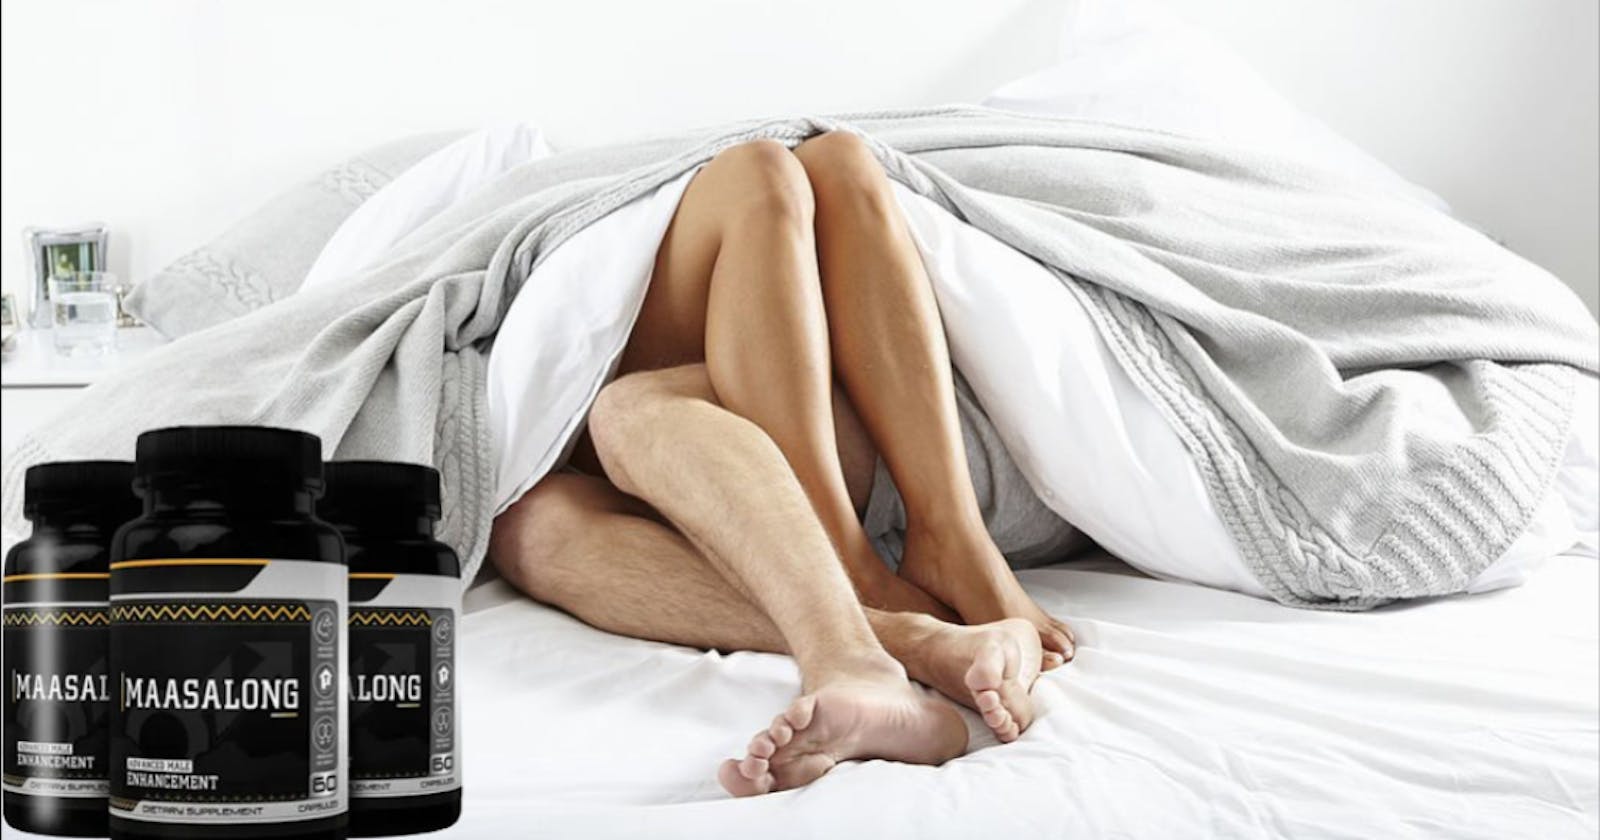 Maasalong Male Enhancement Increase Sexual Performance & Get Better Your Life